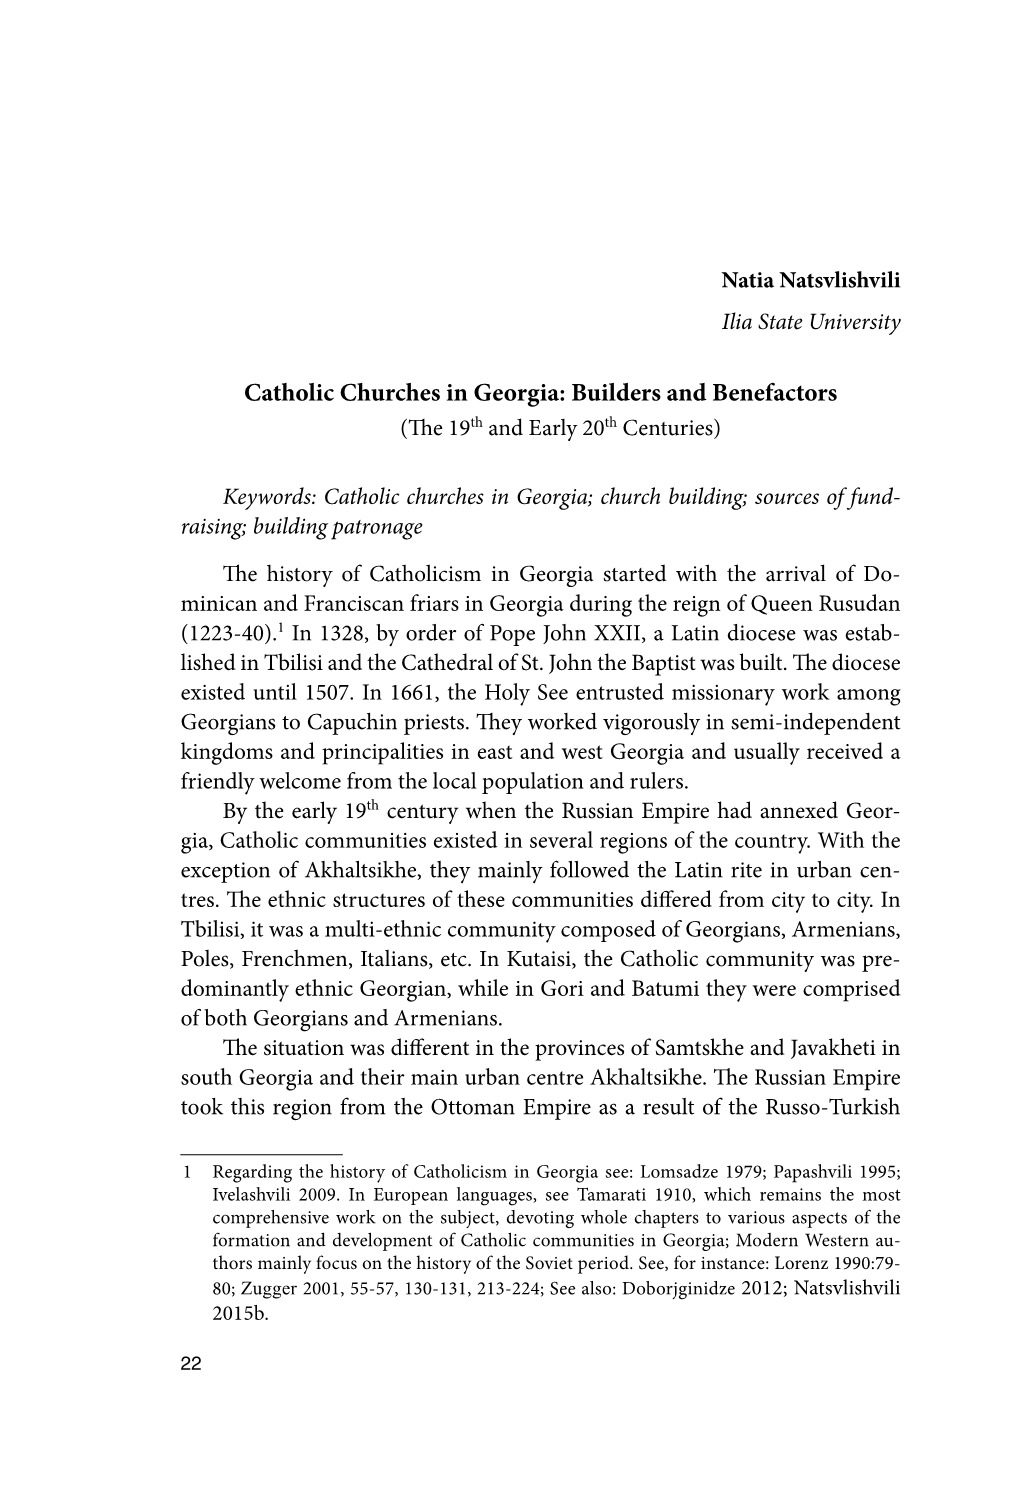 Catholic Churches in Georgia: Builders and Benefactors (The 19Th and Early 20Th Centuries)